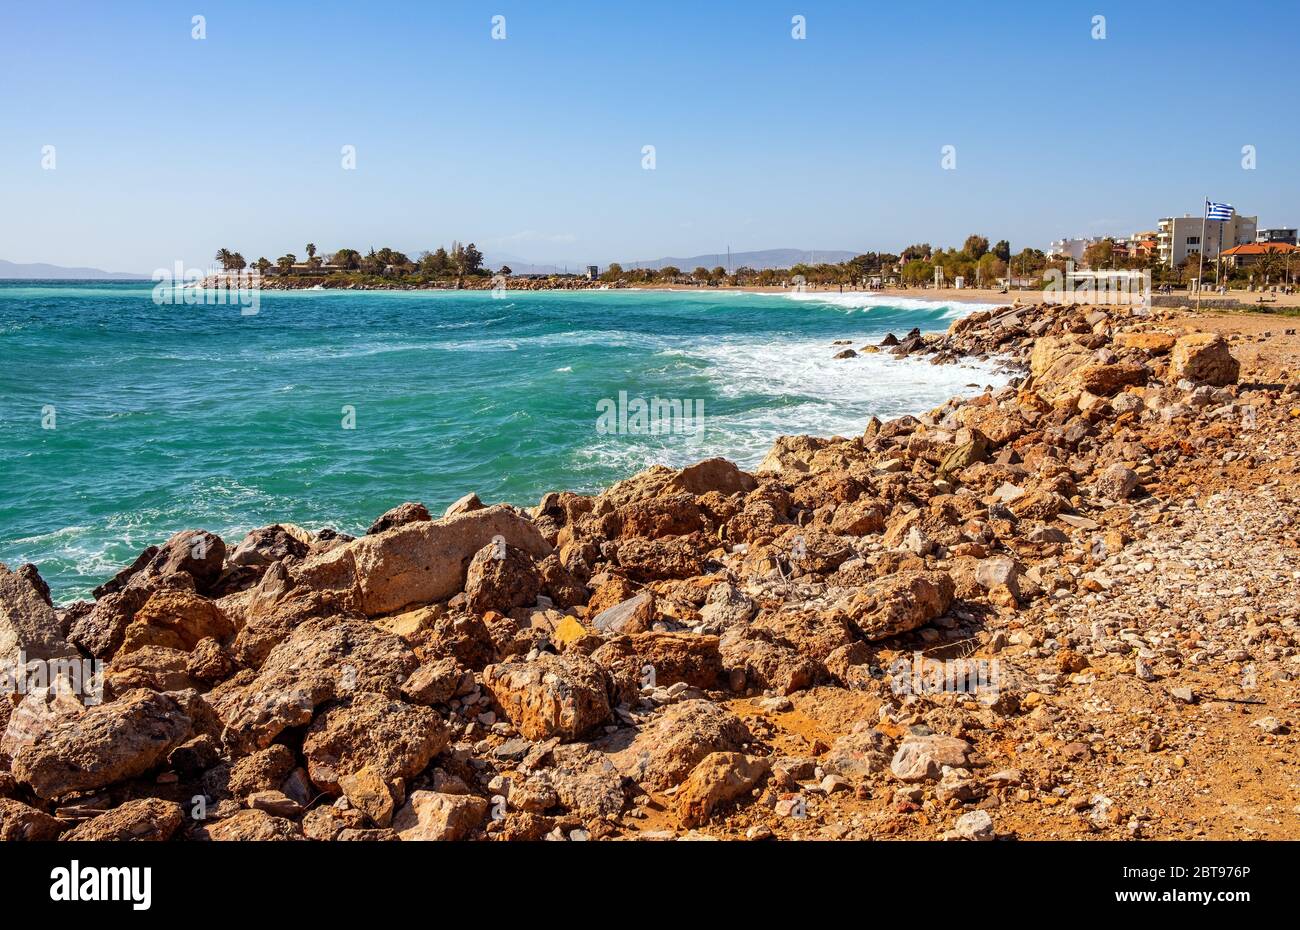 Ancient Greece Athens Piraeus Port High Resolution Stock Photography and  Images - Alamy